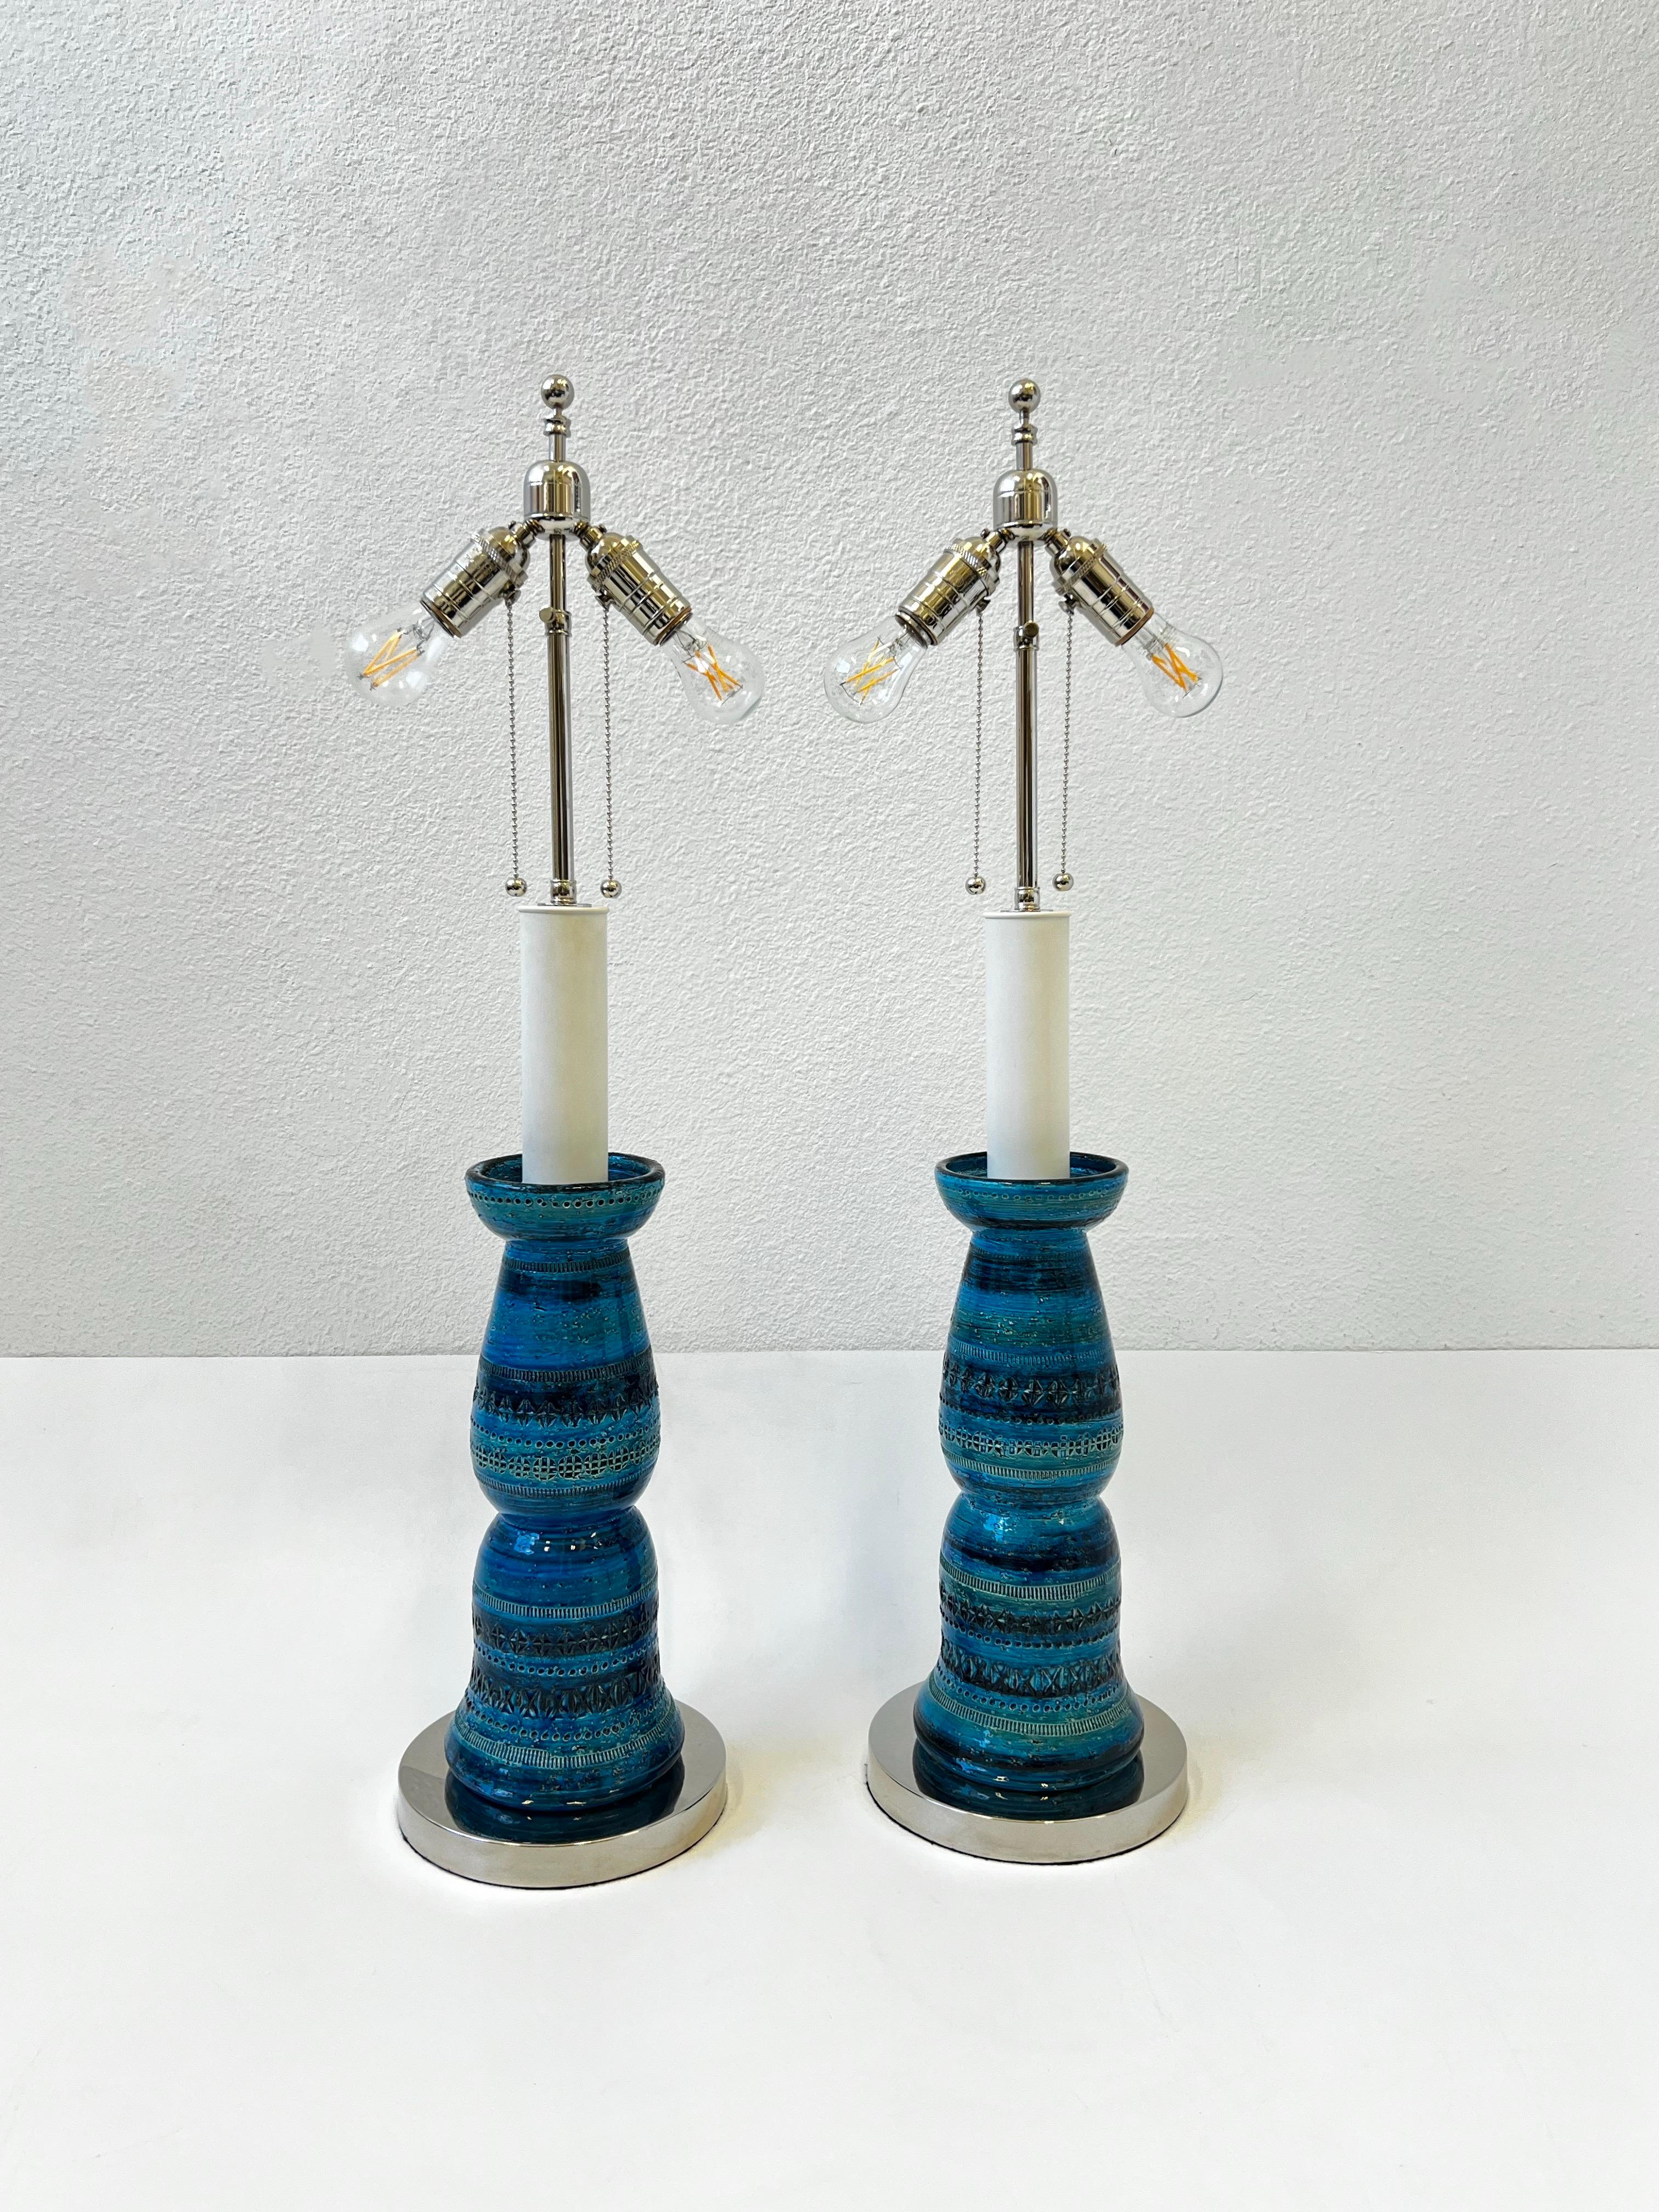 Glamorous pair of 1960’s Italian ceramic ‘Rimini Blue’ table lamps by renowned Italian ceramicist Aldo Londi for Bitossi. 
The ceramic bases are hand made and painted in Italy.
Newly rewired with new polish chrome hardware, black cloth cord and new